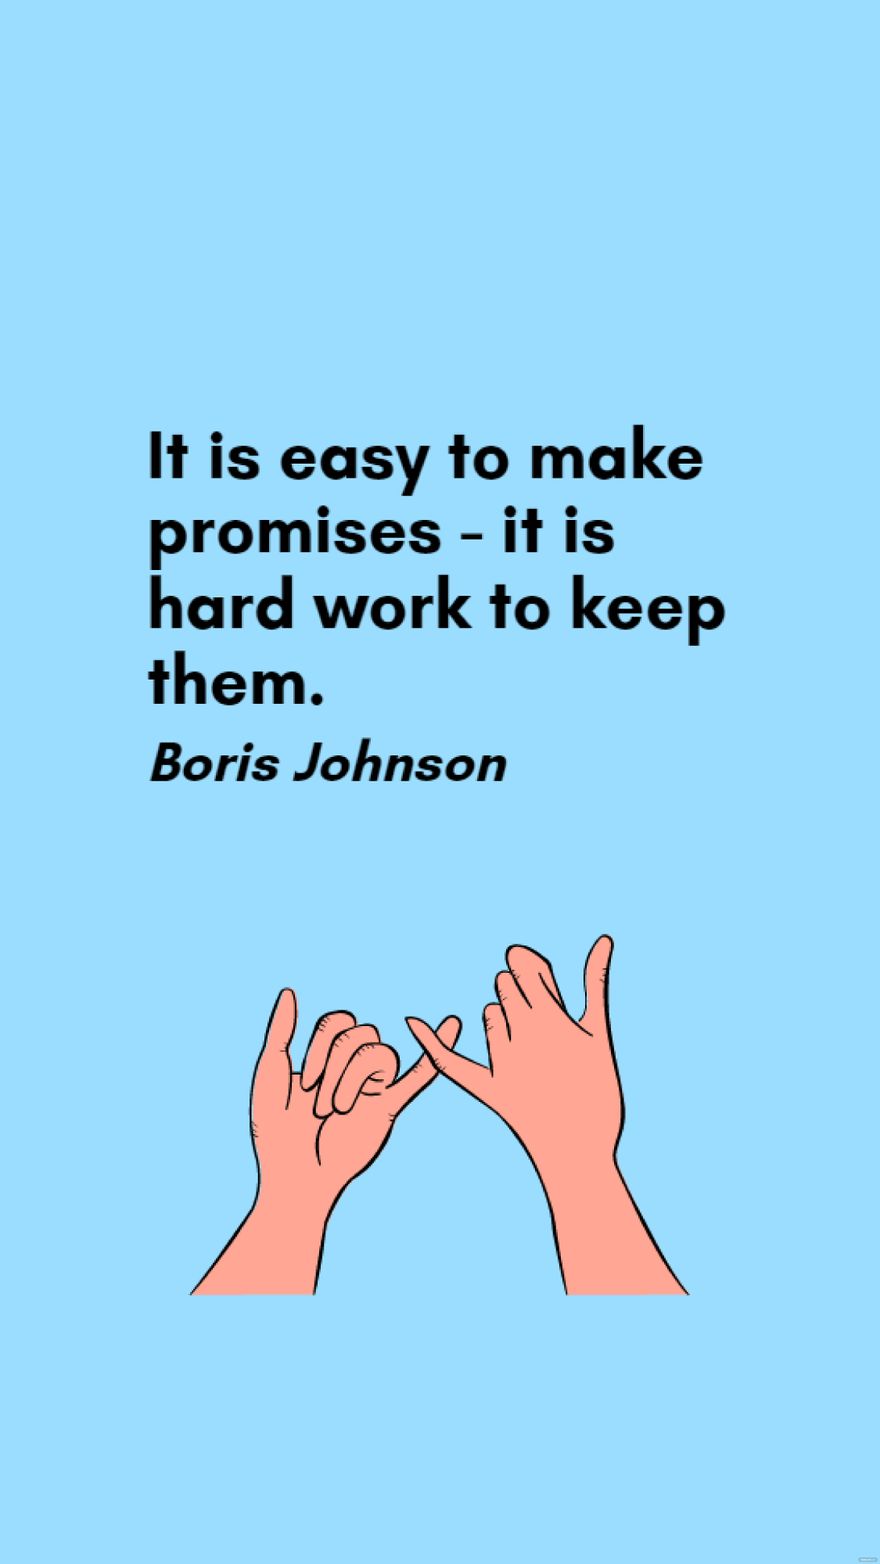 Boris Johnson - It is easy to make promises - it is hard work to keep them. in JPG